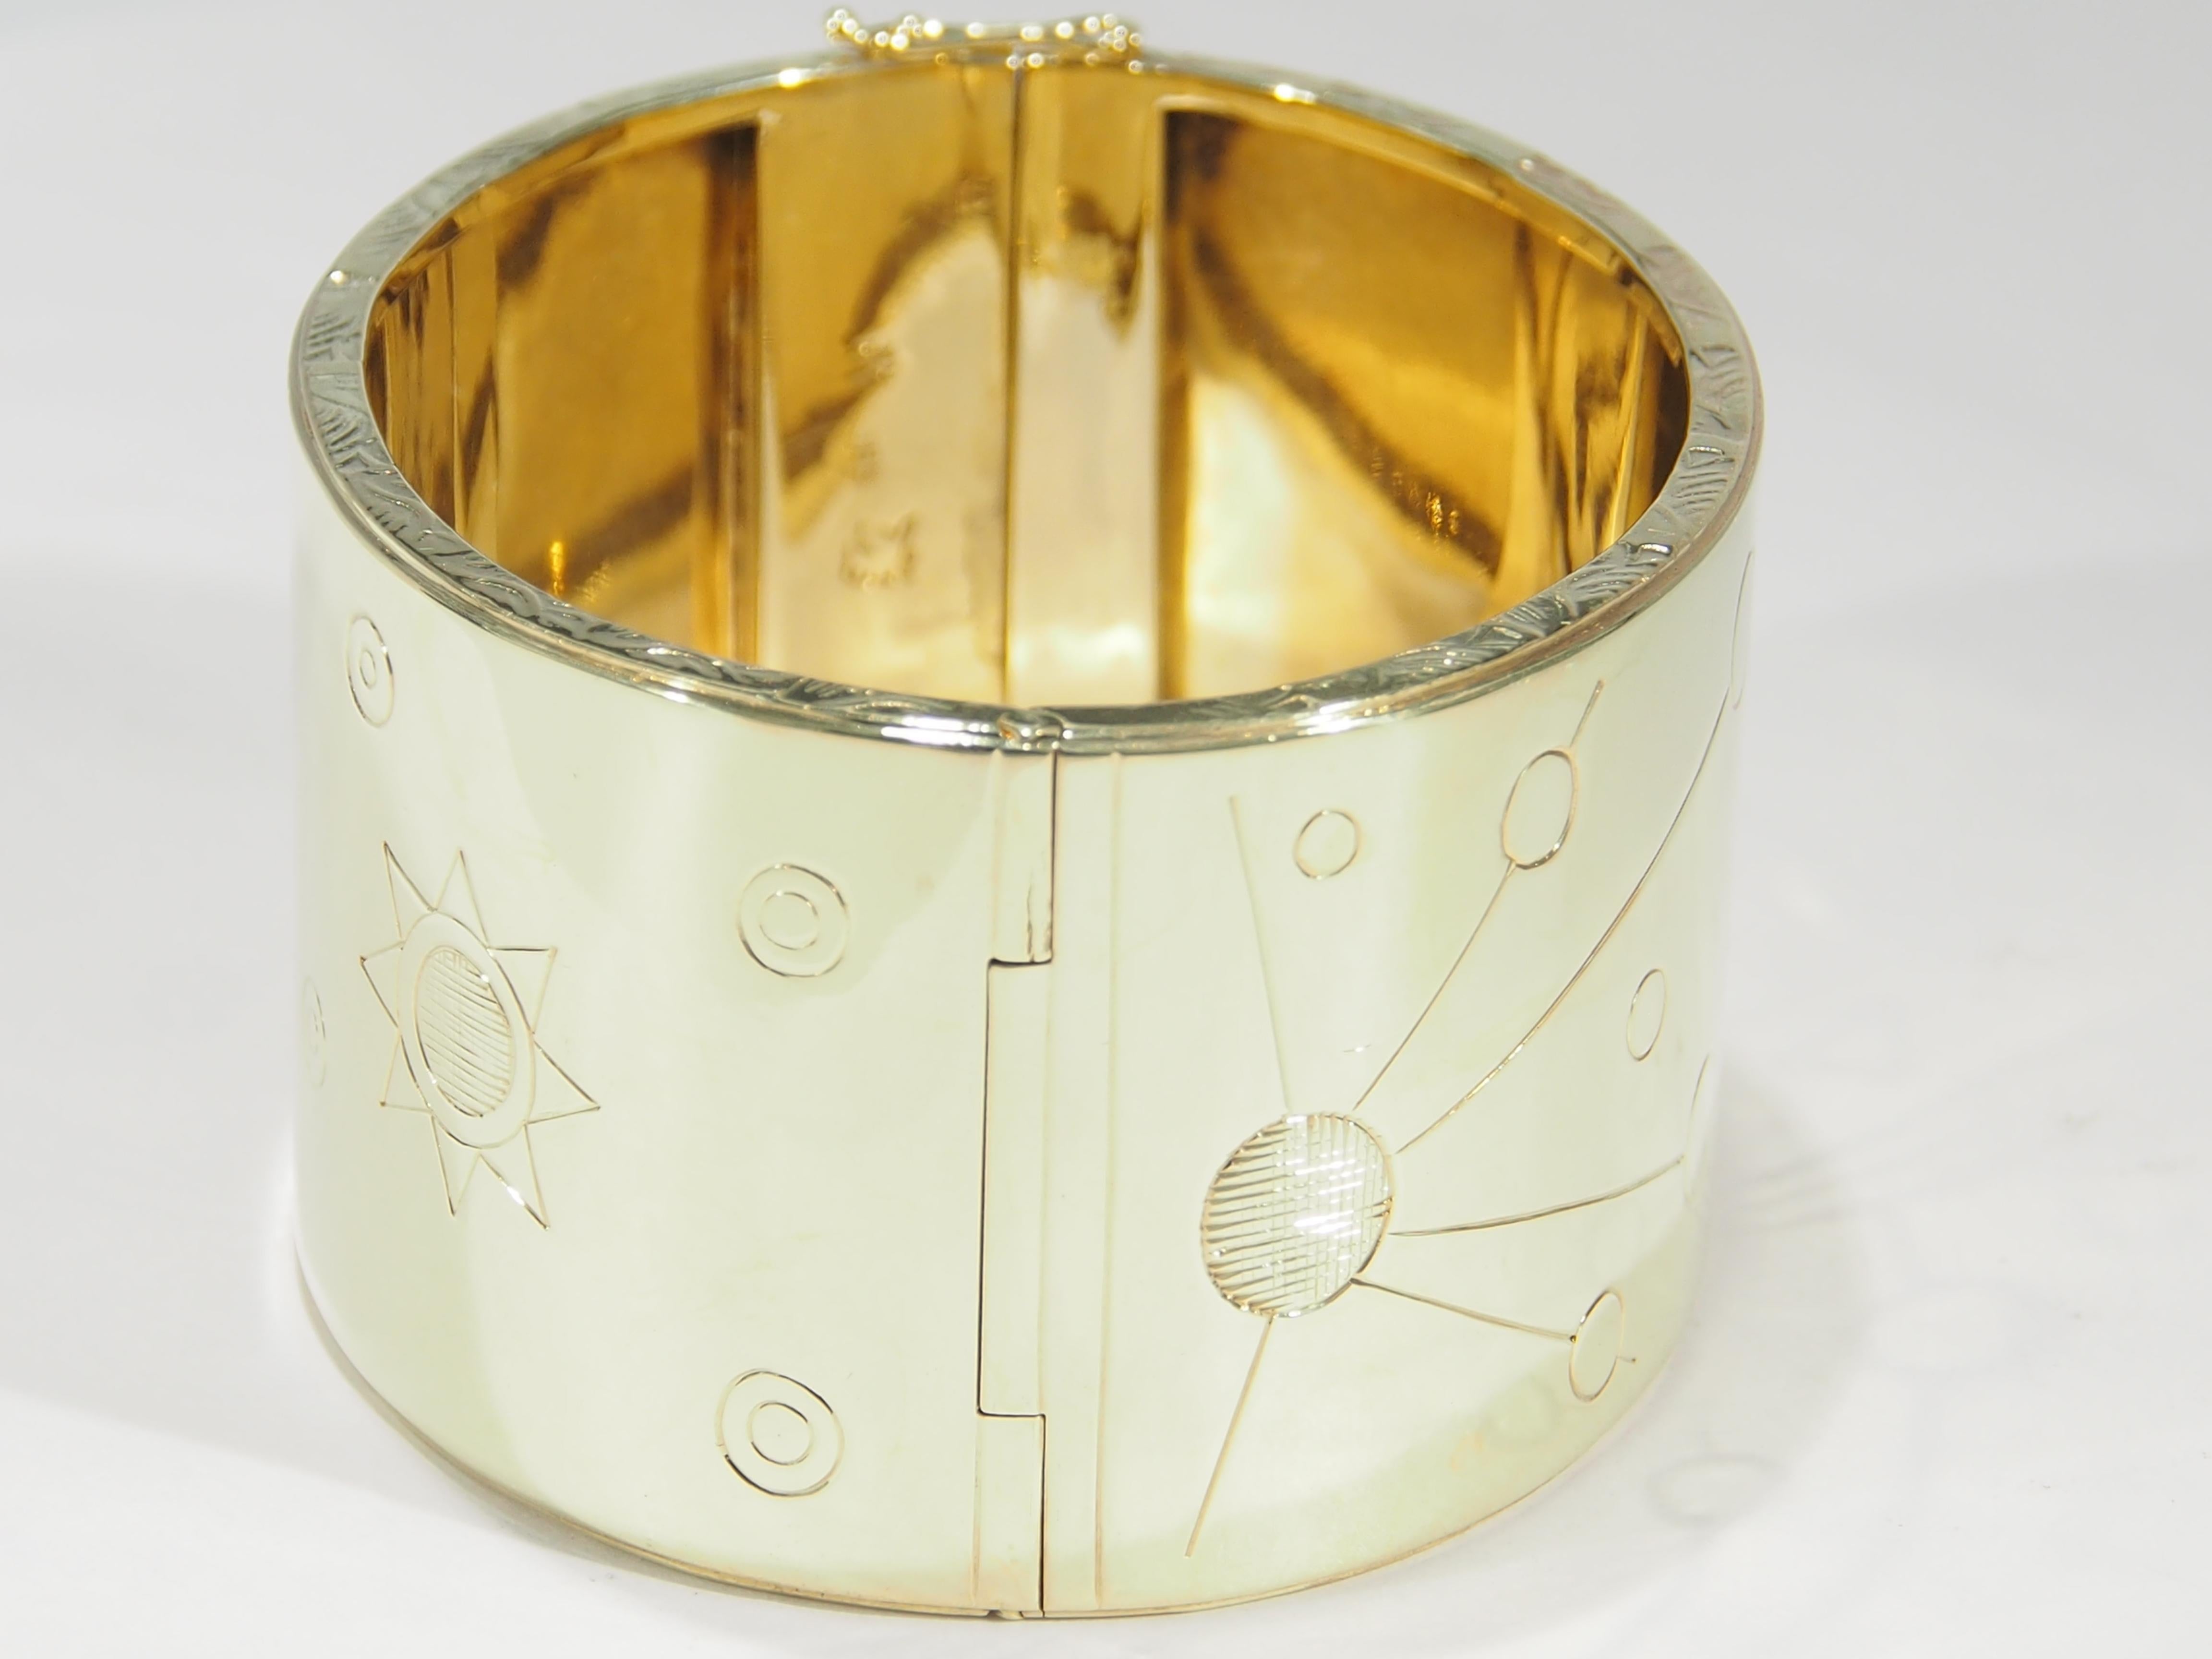 This is a stunning 18K Yellow Gold Wide Cuff Bracelet created with Hand-Made details. The Bracelet has engraved Cosmic Motifs of the Sun and the Planets in a 1 1/2 inch width making this a most fascinating Cuff. Please see the photographs to fully